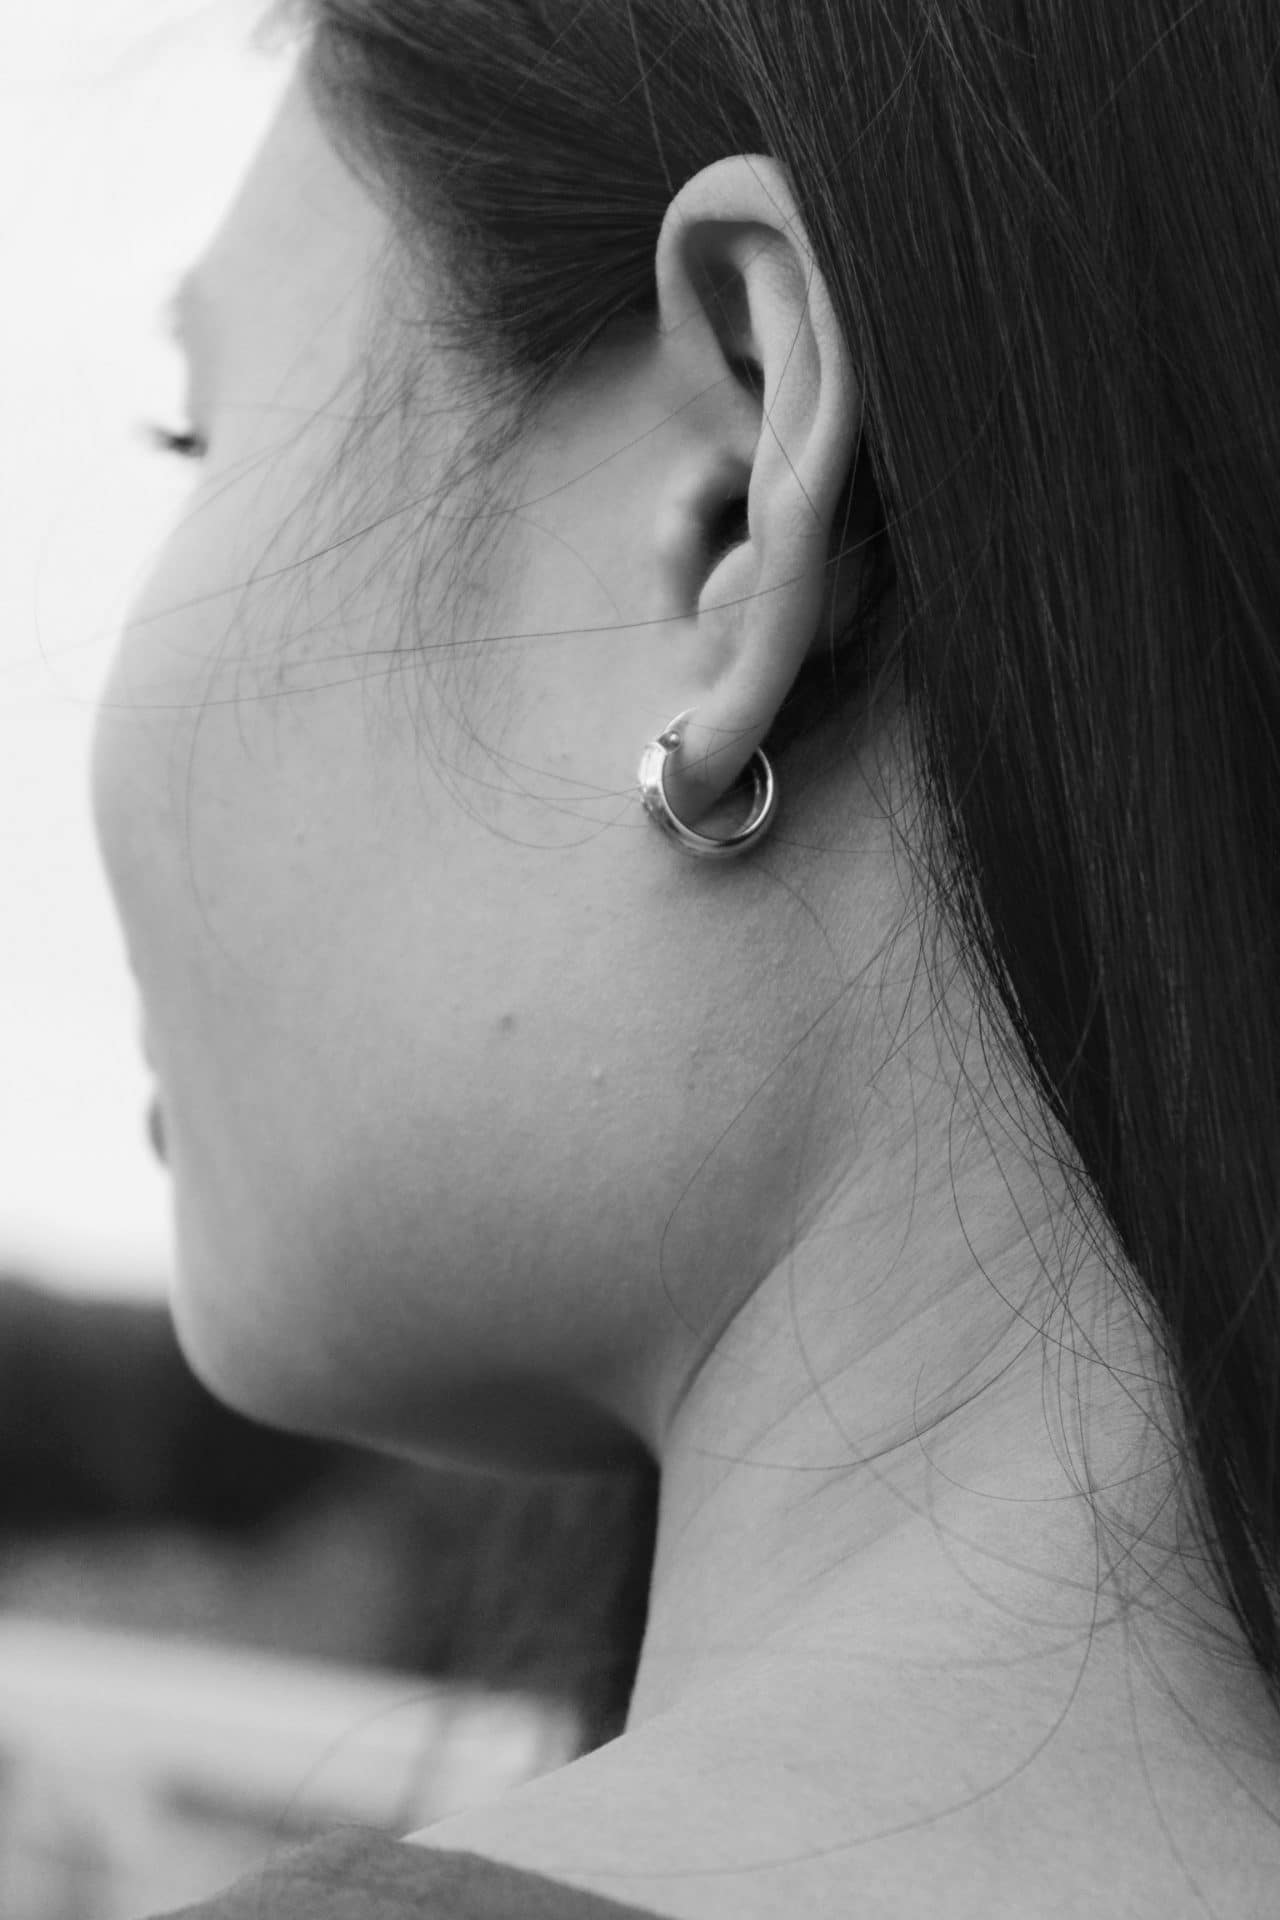 Black-and-white close-up of a woman's ear